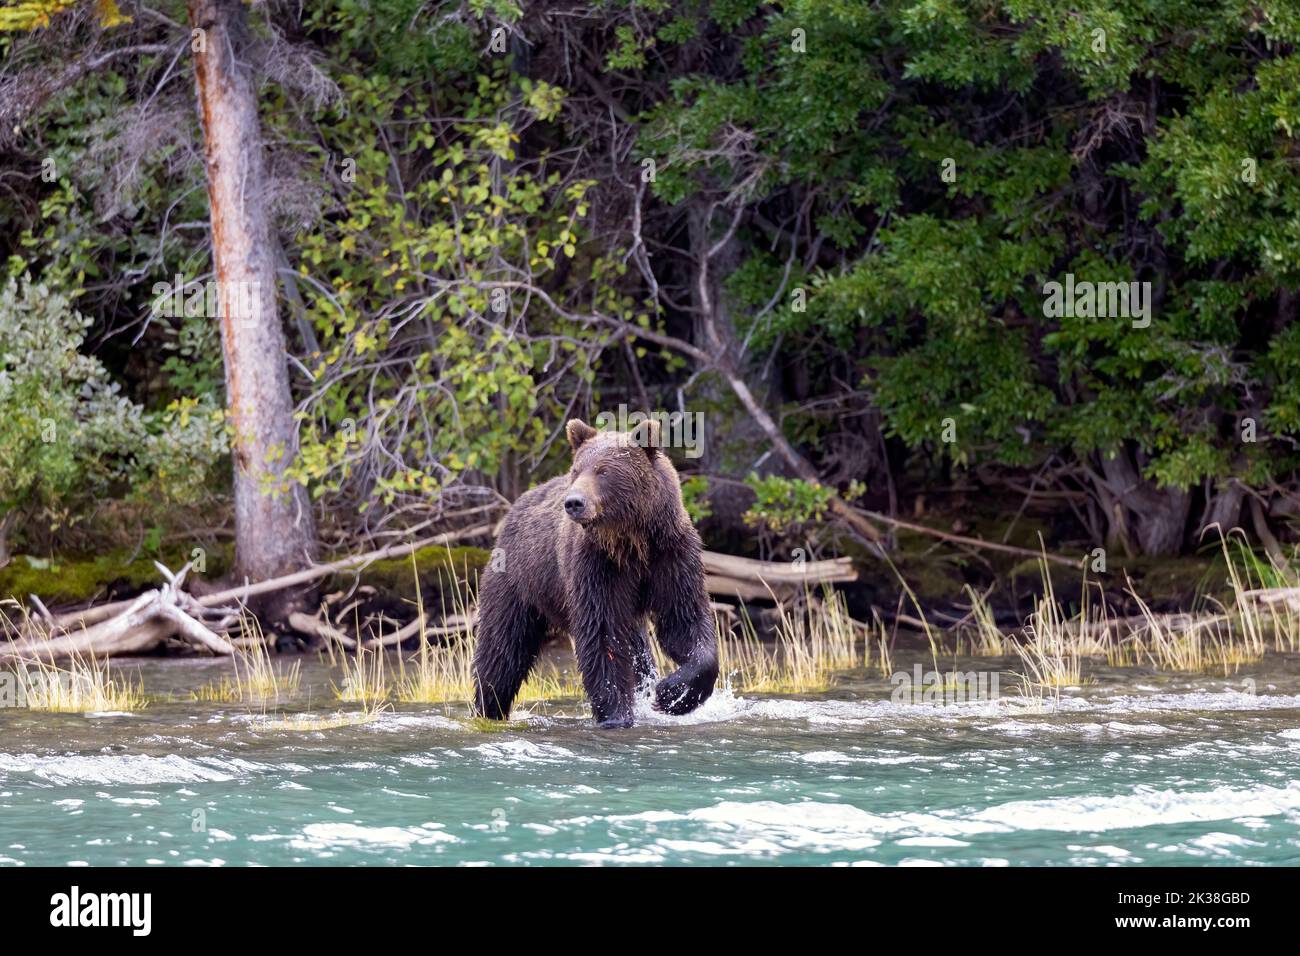 Grizzly Bear Entering River Stock Photo